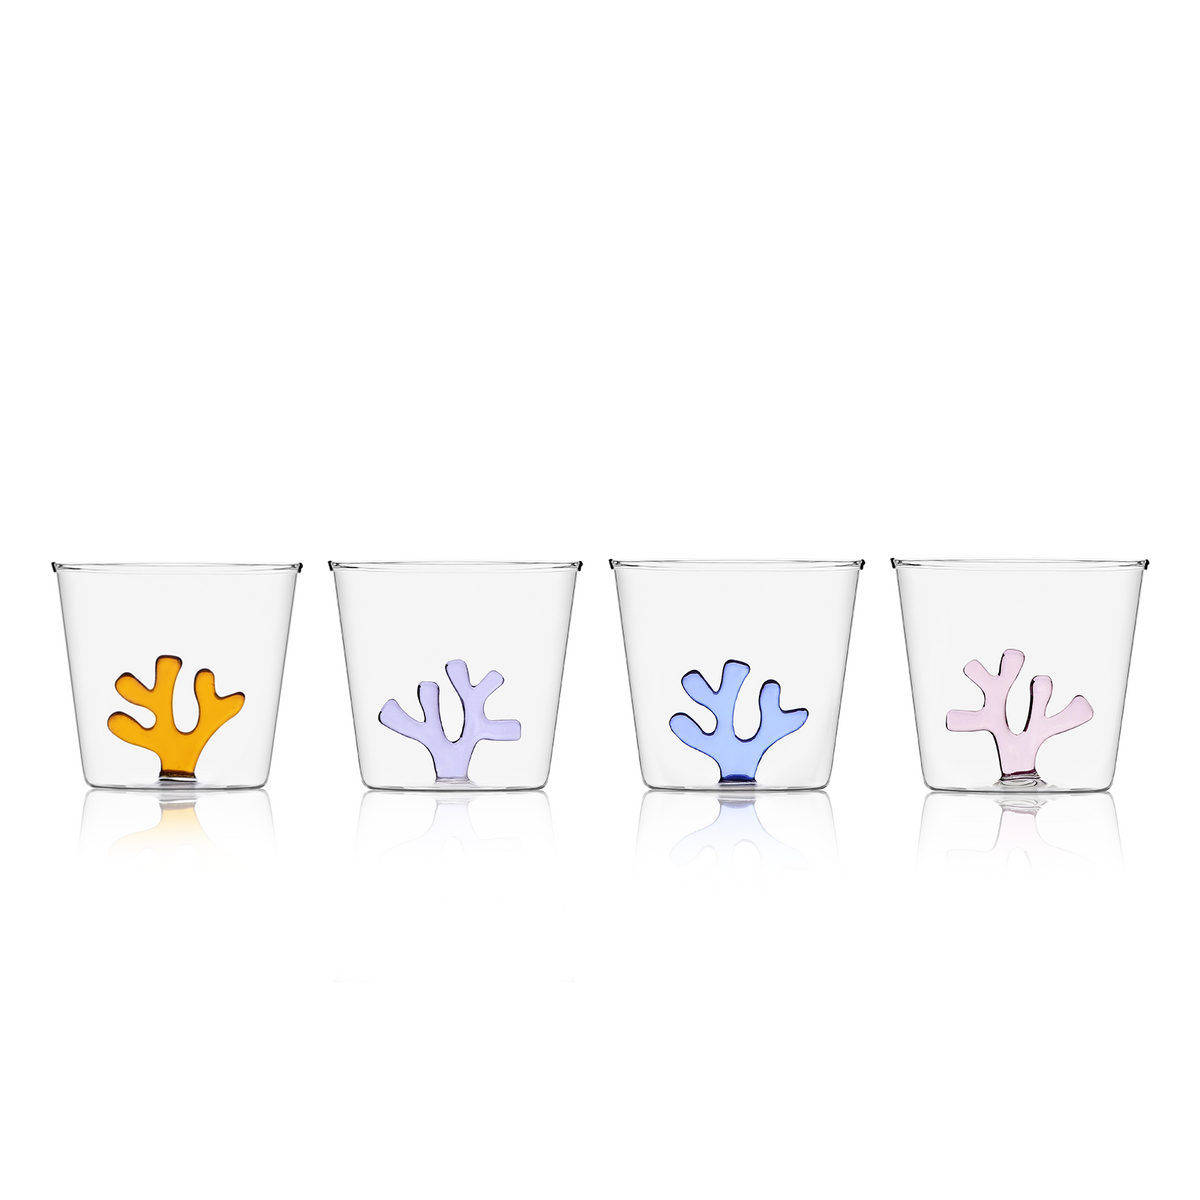 Four all-purpose clear hand-blown glasses feature a colourful coral on the inside. The glasses are available in amber, lilac, blue, blush pink.